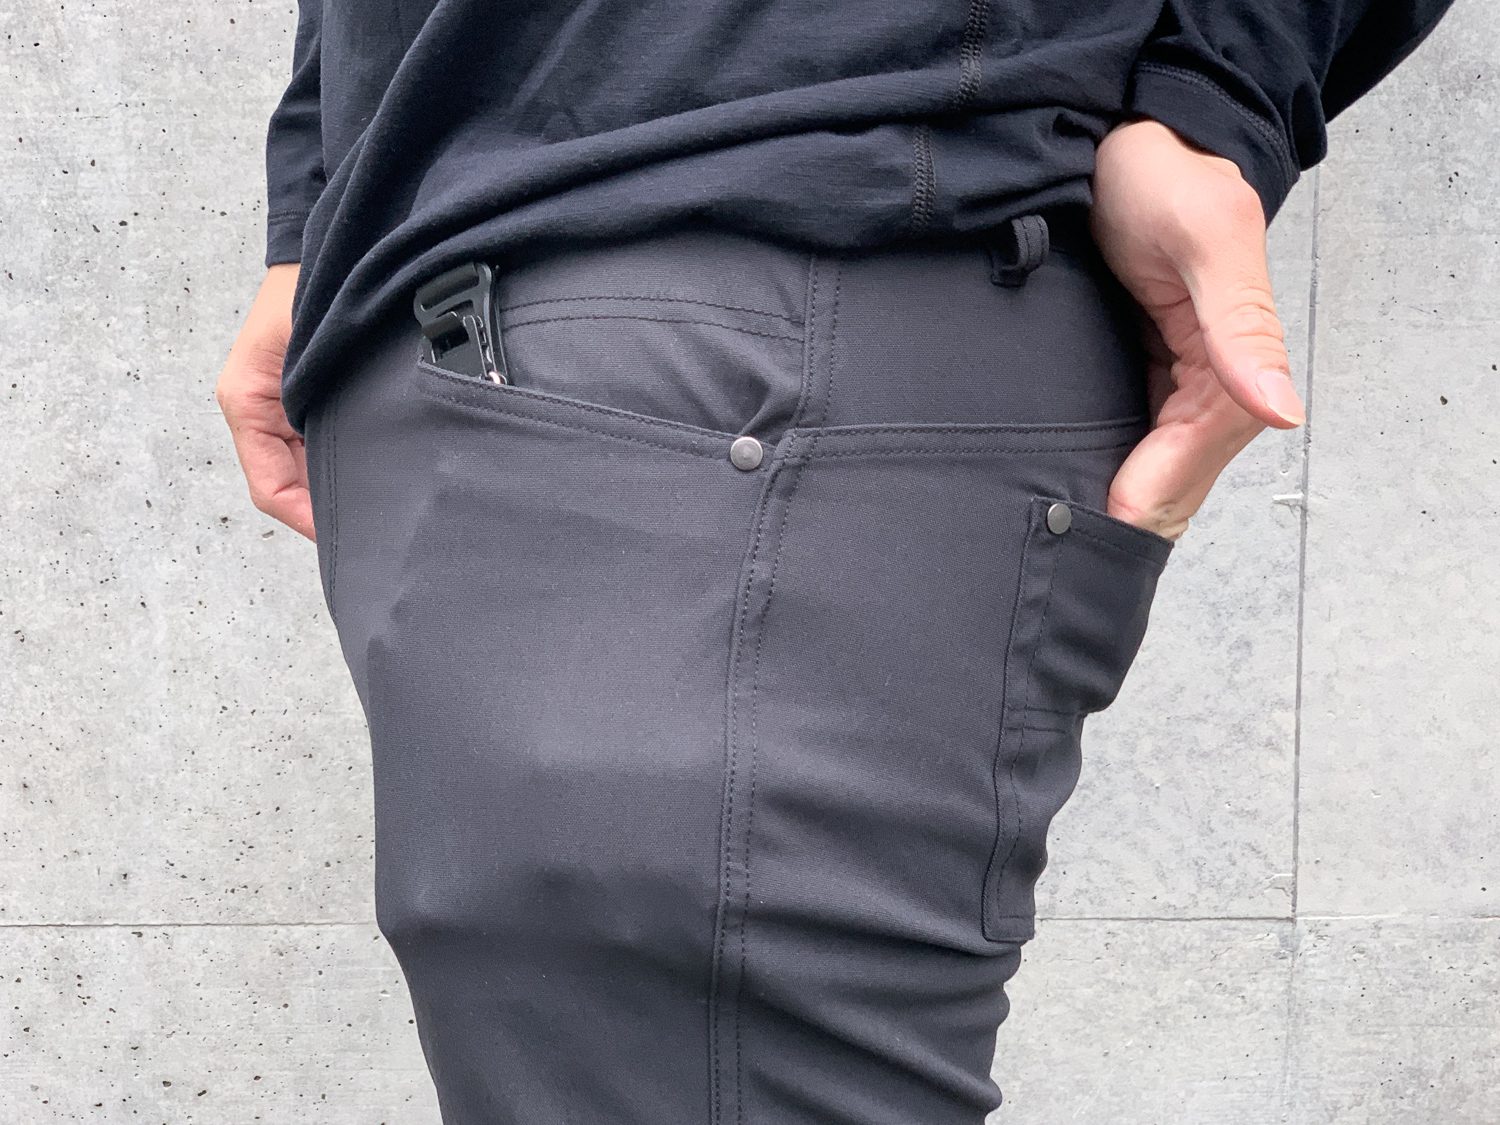 A Complete Western Rise AT Slim Pants Review for Stylish Commuters